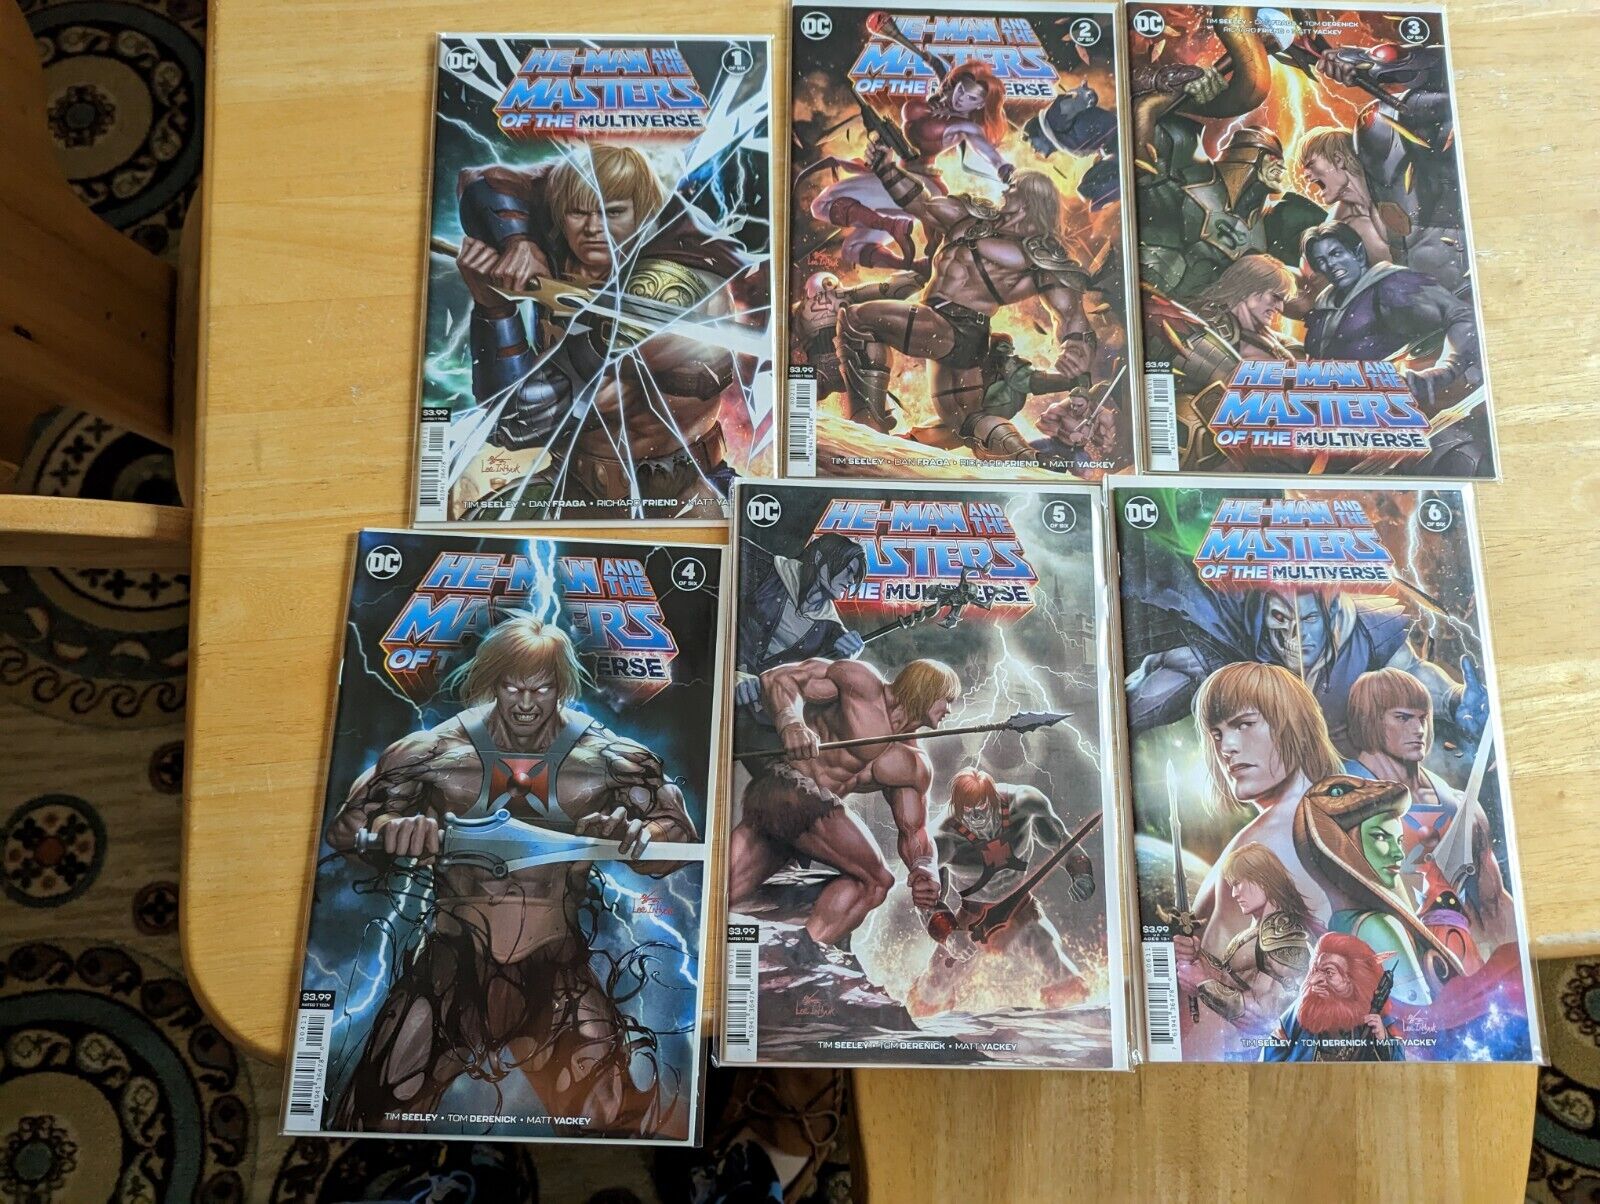 He-Man and the Masters of the Multiverse - 1, 2, 3, 4, 5, 6 - Complete Series